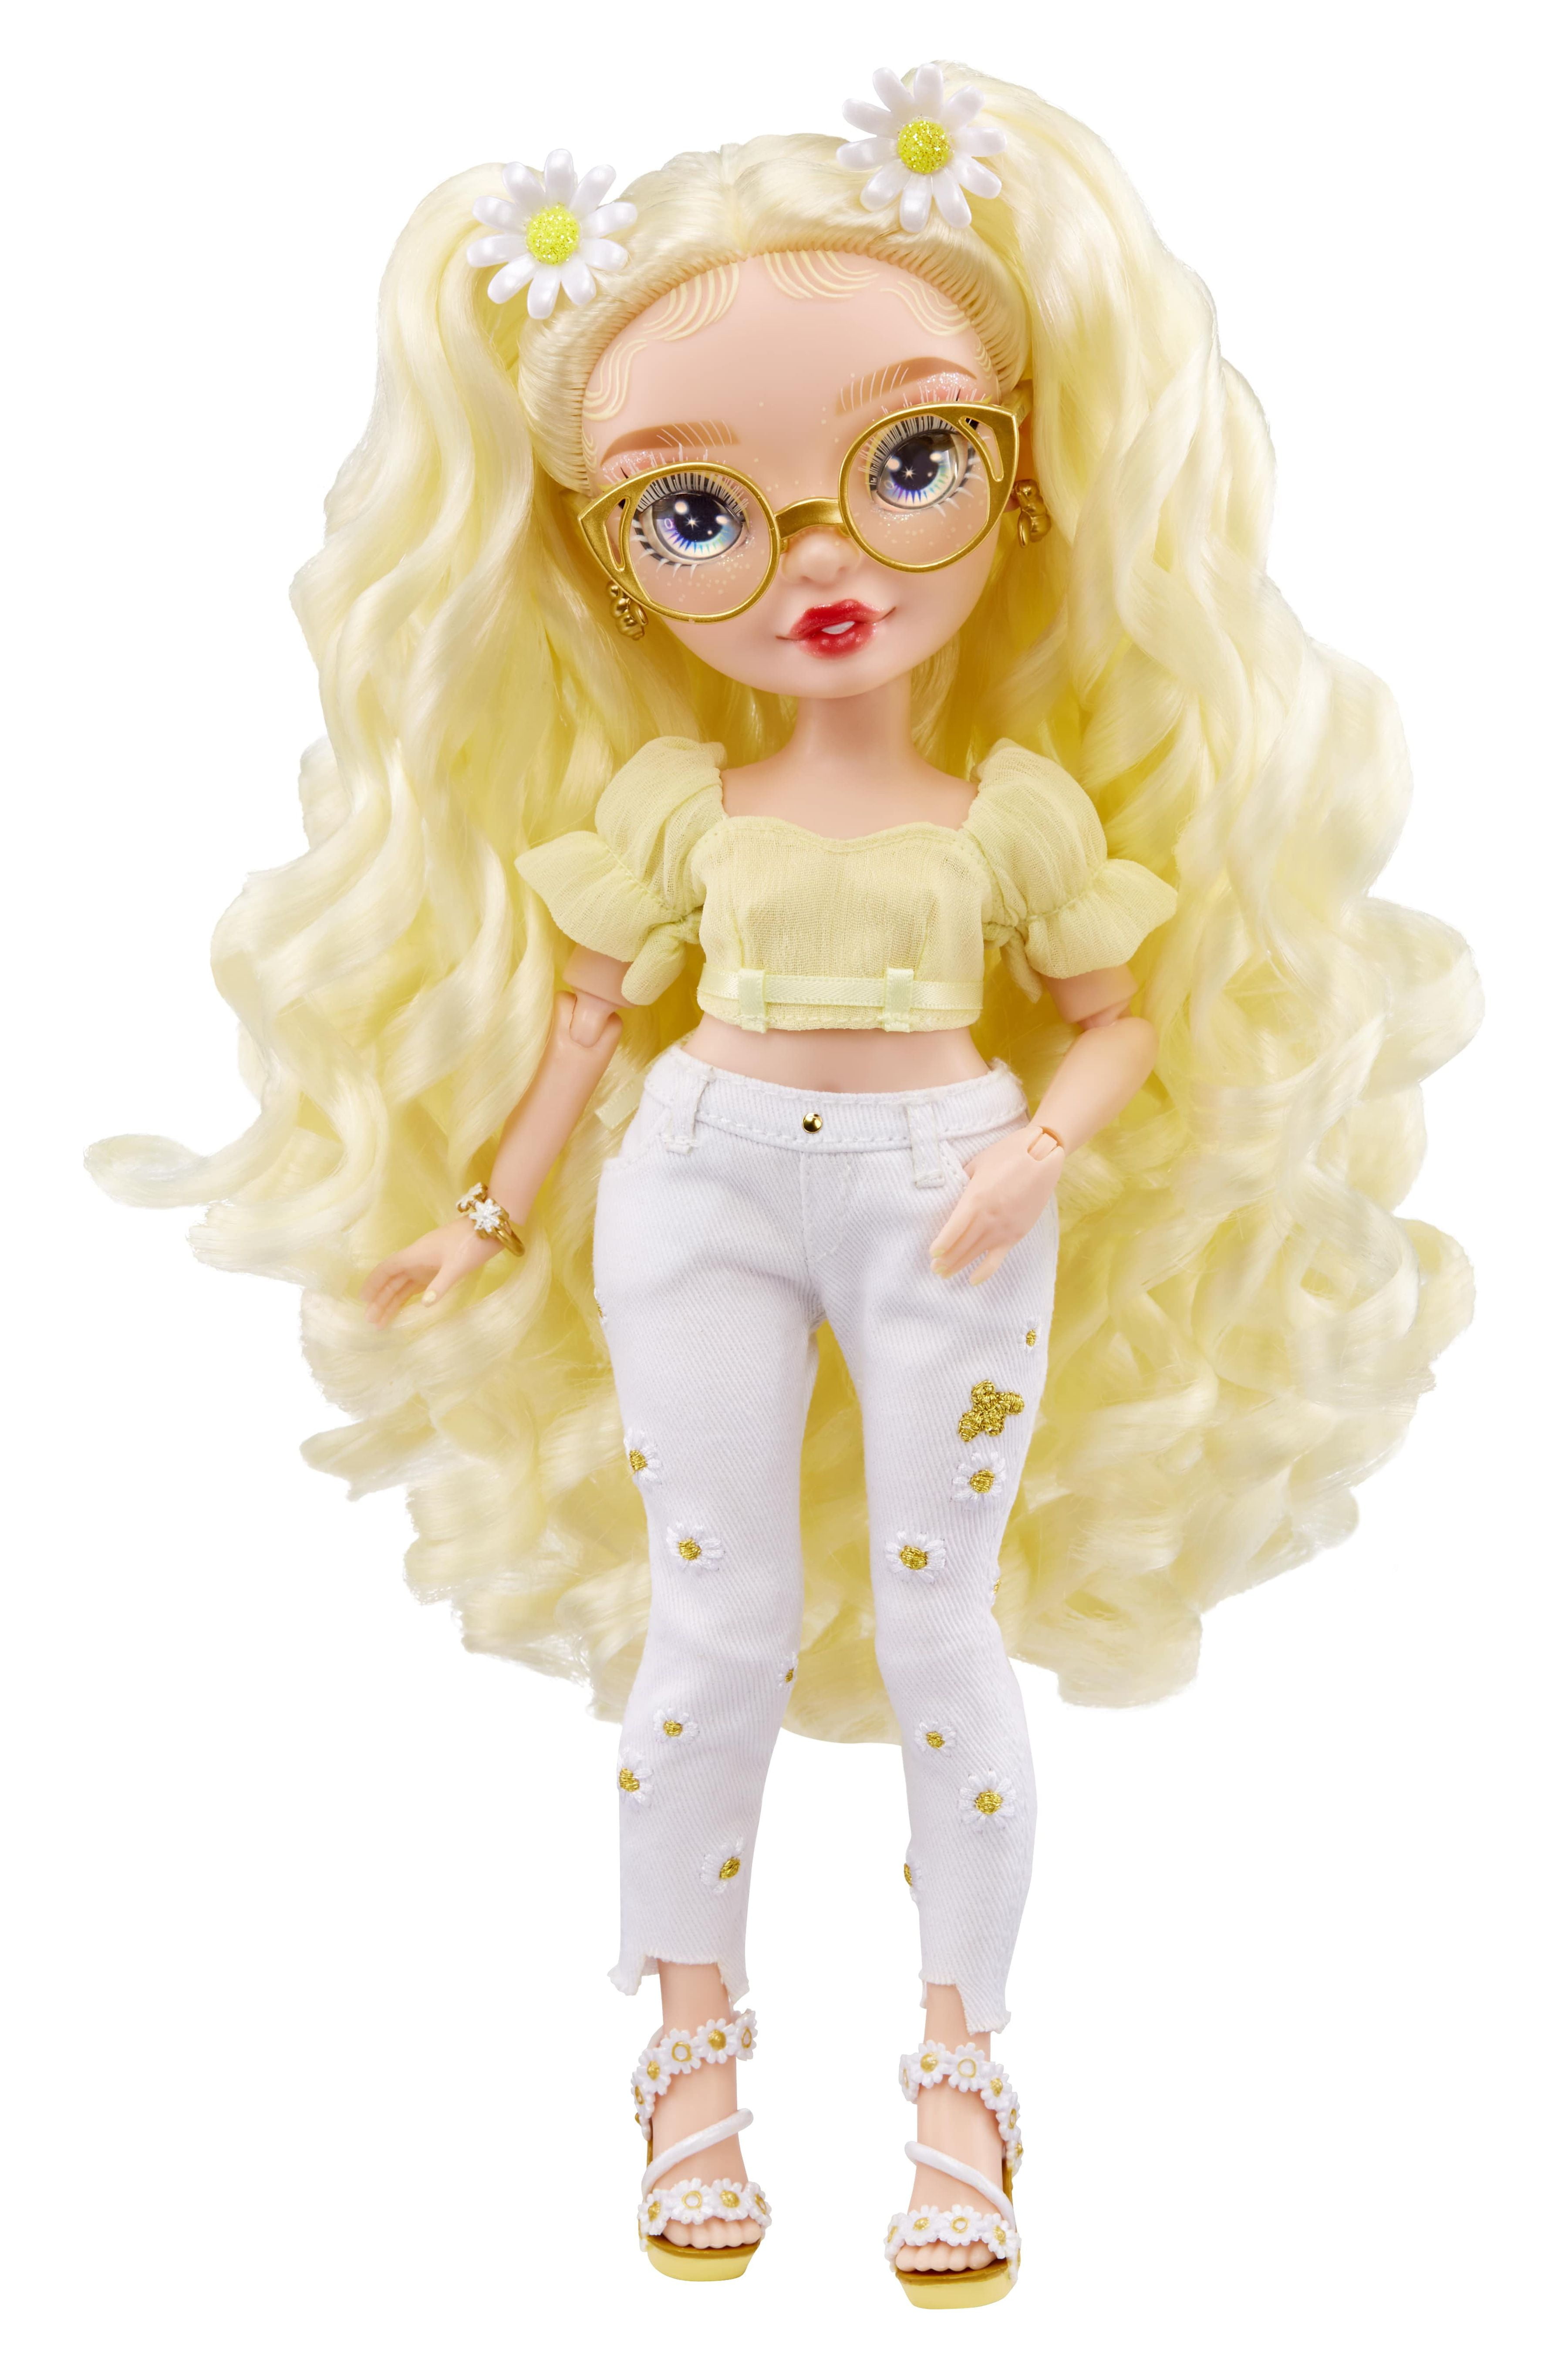 Rainbow High Delilah Fields- Buttercup Yellow Fashion Doll with Albinism &  Glasses. 2 Designer Outfits to Mix & Match with Accessories, Great Gift for